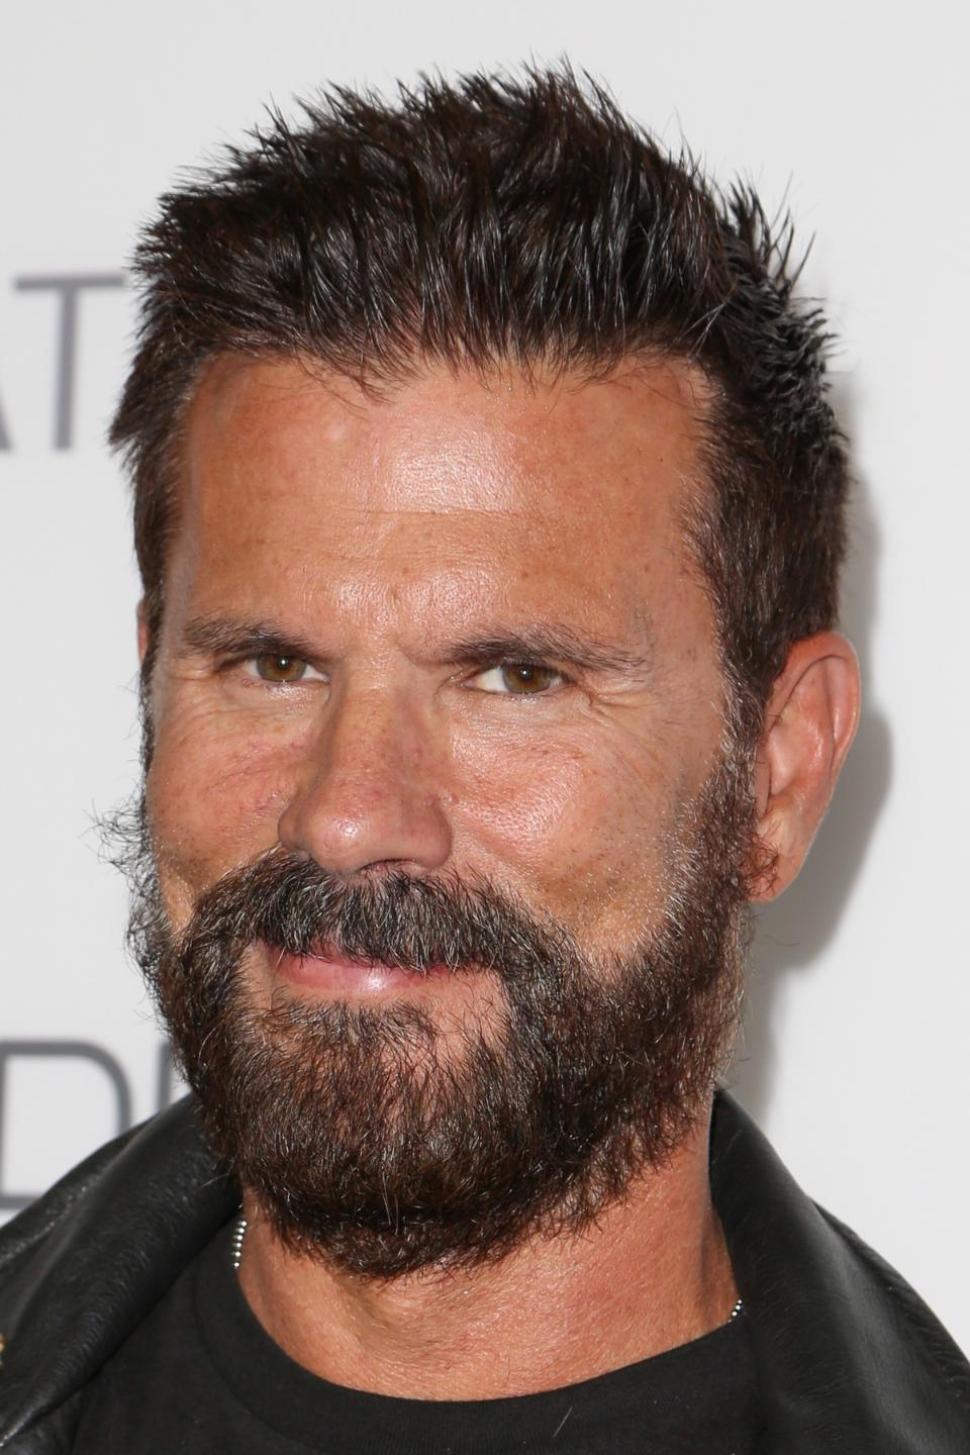 Lorenzo Lamas looks like he was using a landscaper rather than a hairdresser.